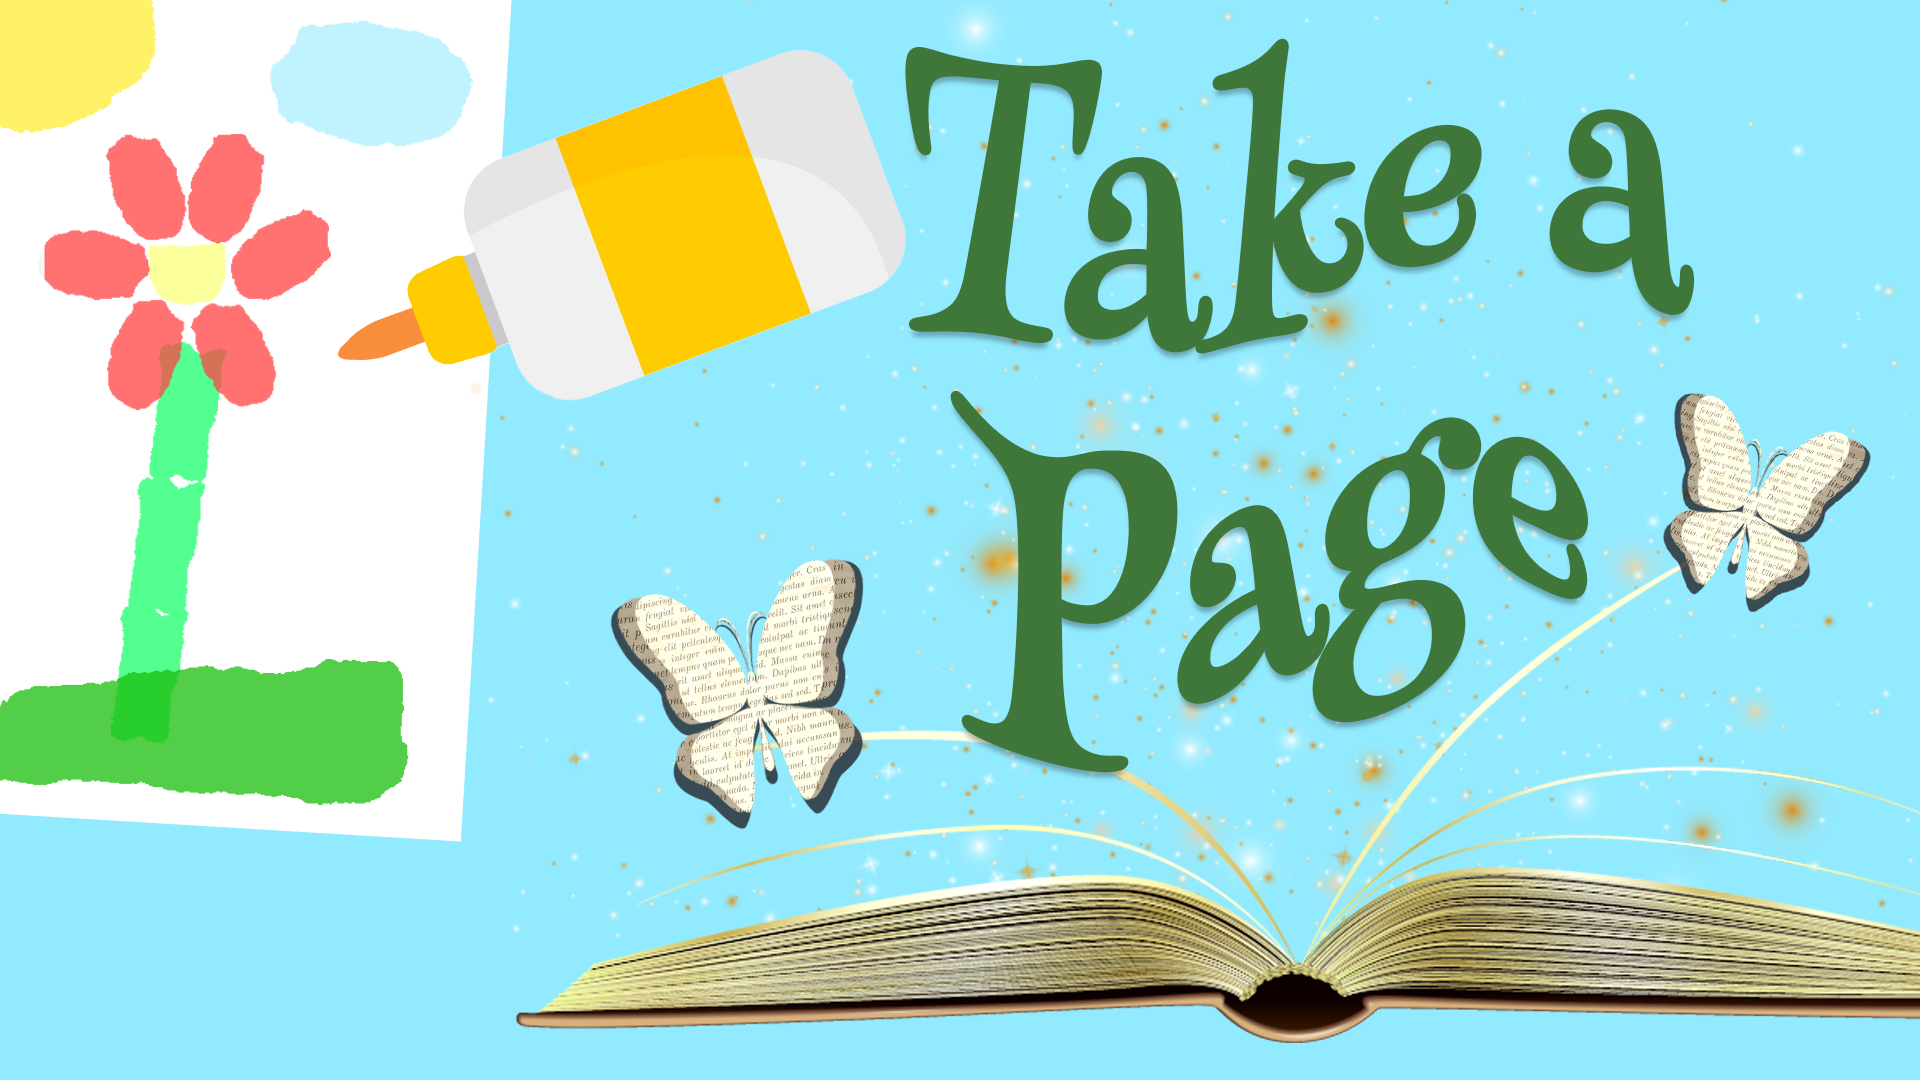 Image reads "Take a Page" in green coming from a magical book. To the left of the title is a tissue paper collage and a glue bottle. There are 2 book page butterflies beside the title.